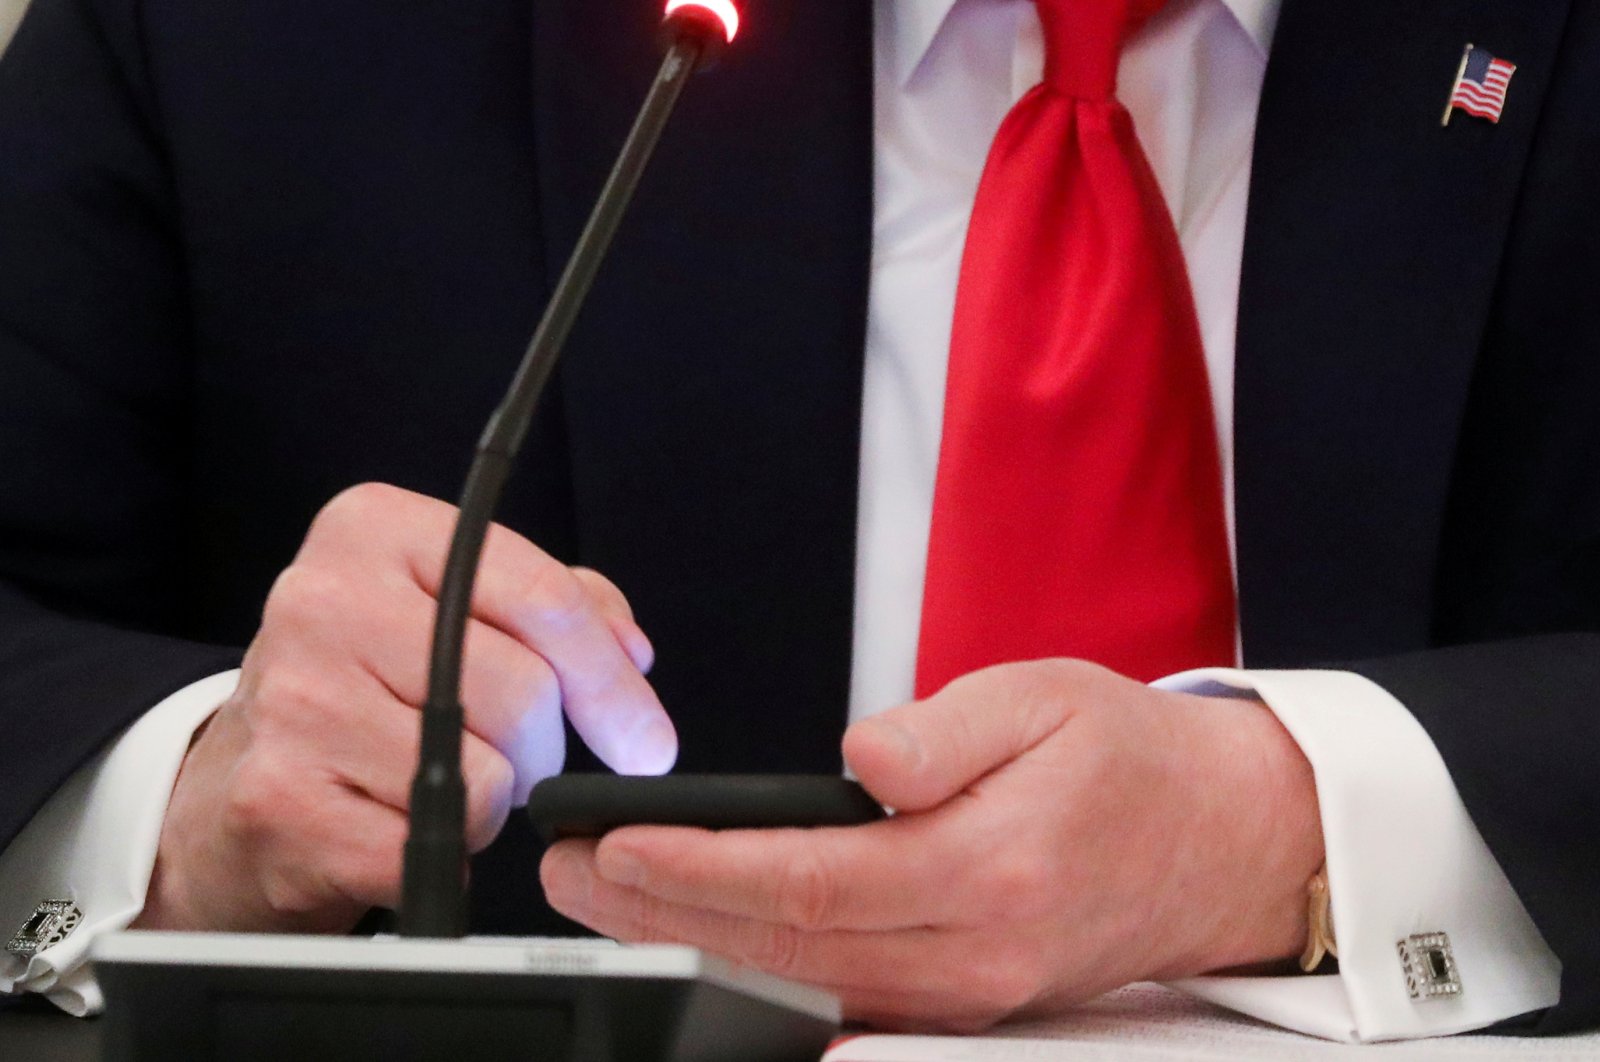 U.S. President Donald Trump taps the screen on a mobile phone at the approximate time a tweet was released from his Twitter account, during a roundtable discussion on the reopening of small businesses in the State Dining Room at the White House in Washington, D.C., U.S., June 18, 2020. (Reuters Photo)